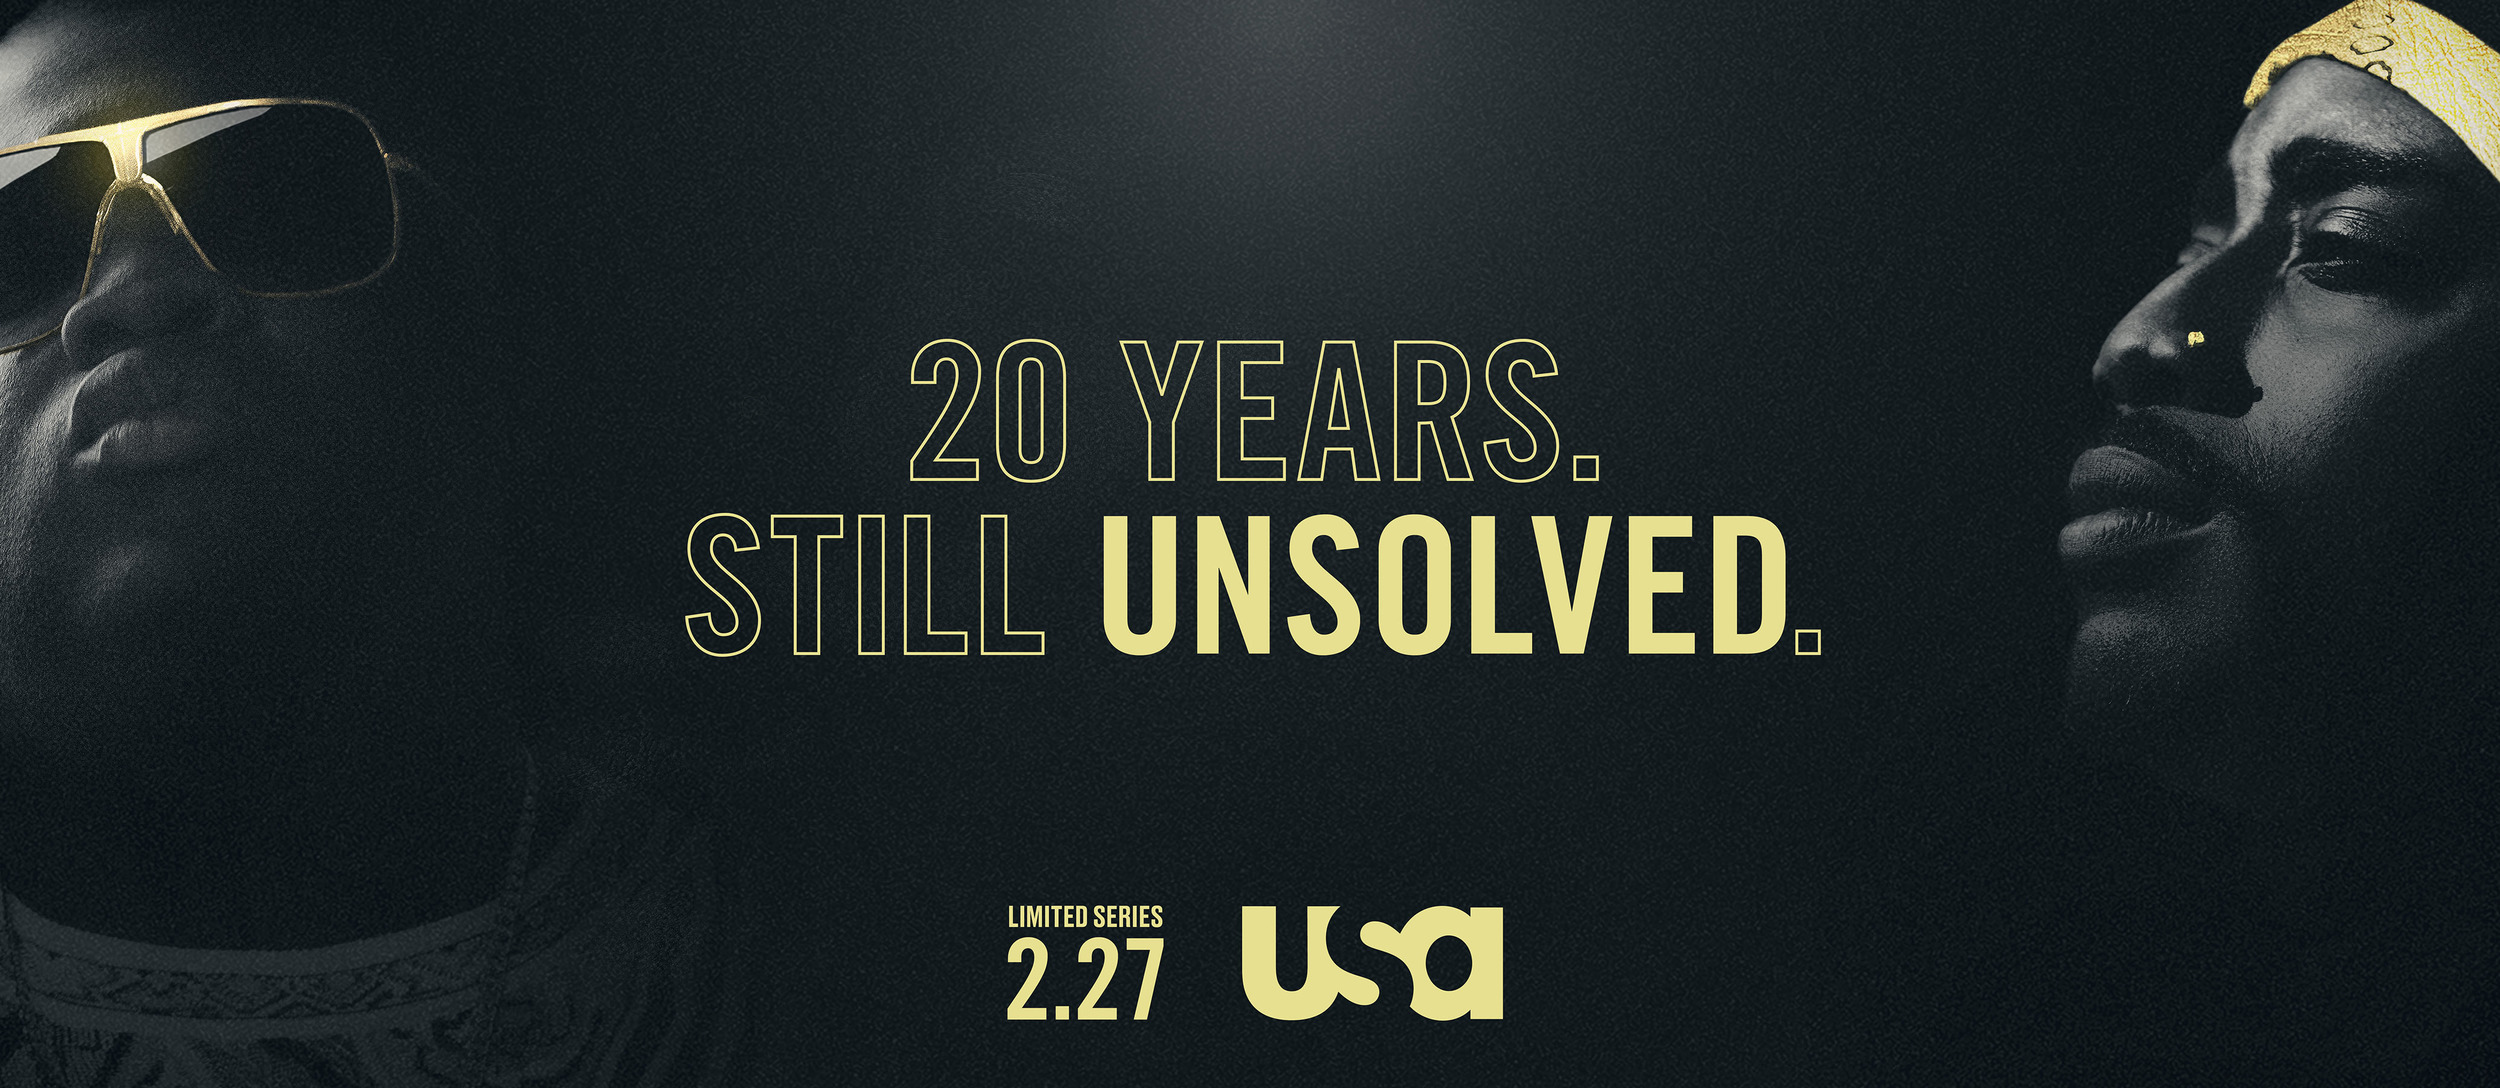 Mega Sized TV Poster Image for Unsolved (#2 of 2)